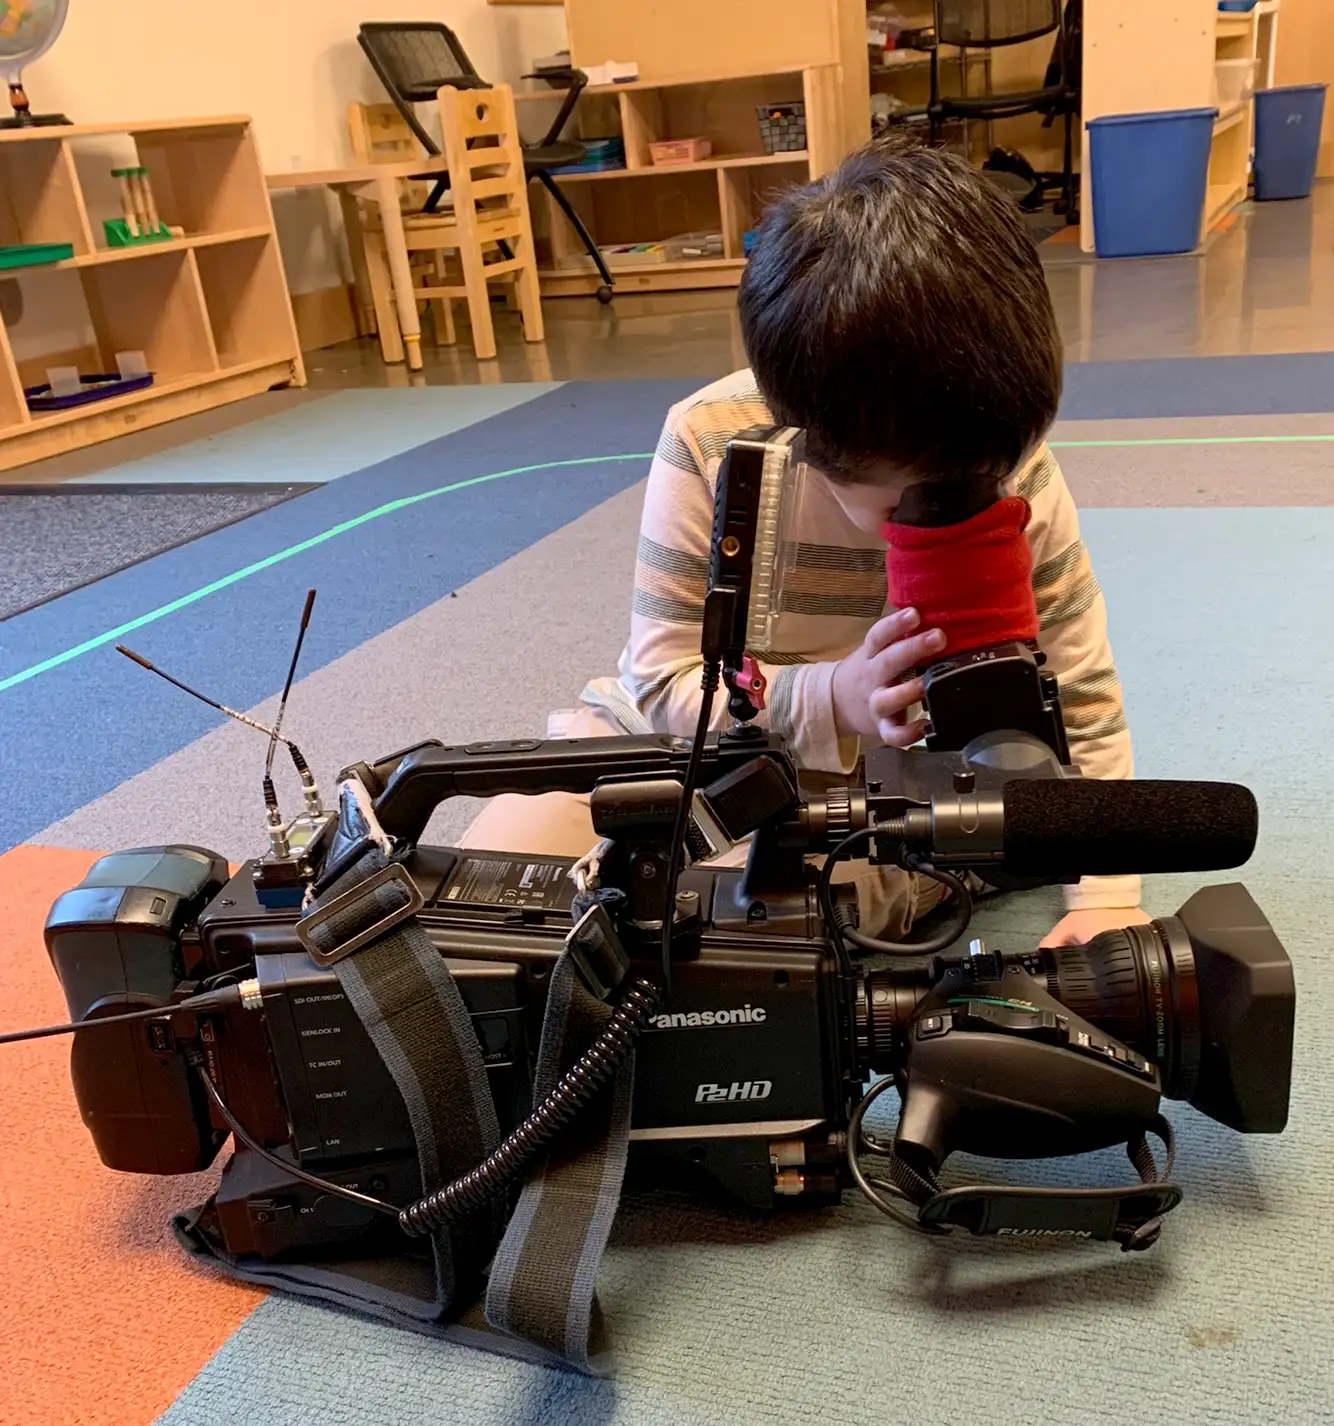 Young boy playing with and studying a video camera